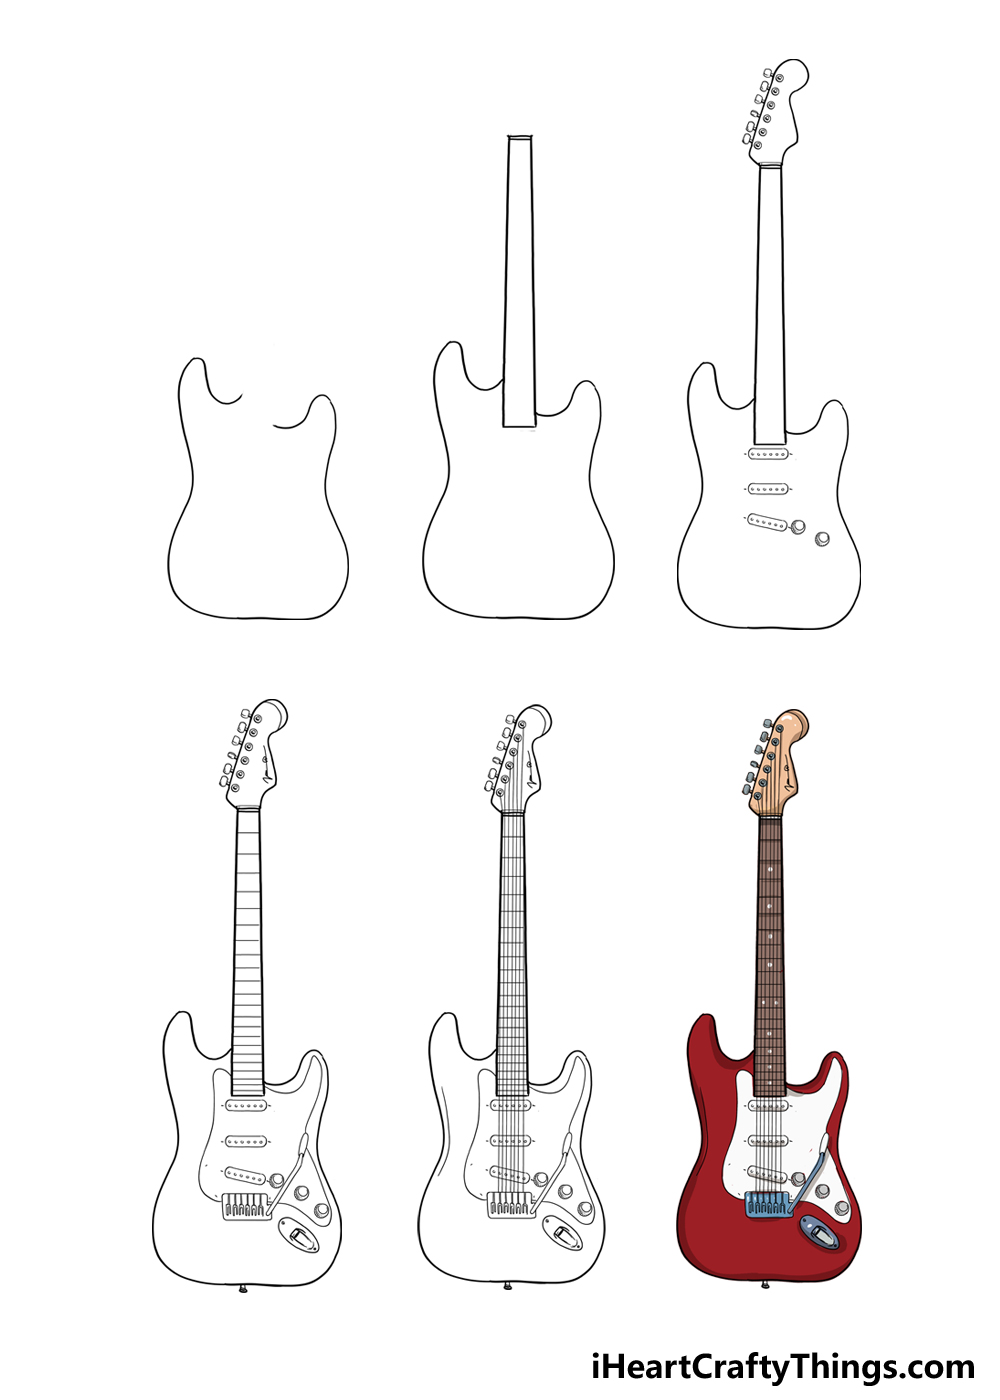 How to Draw An Electric Guitar